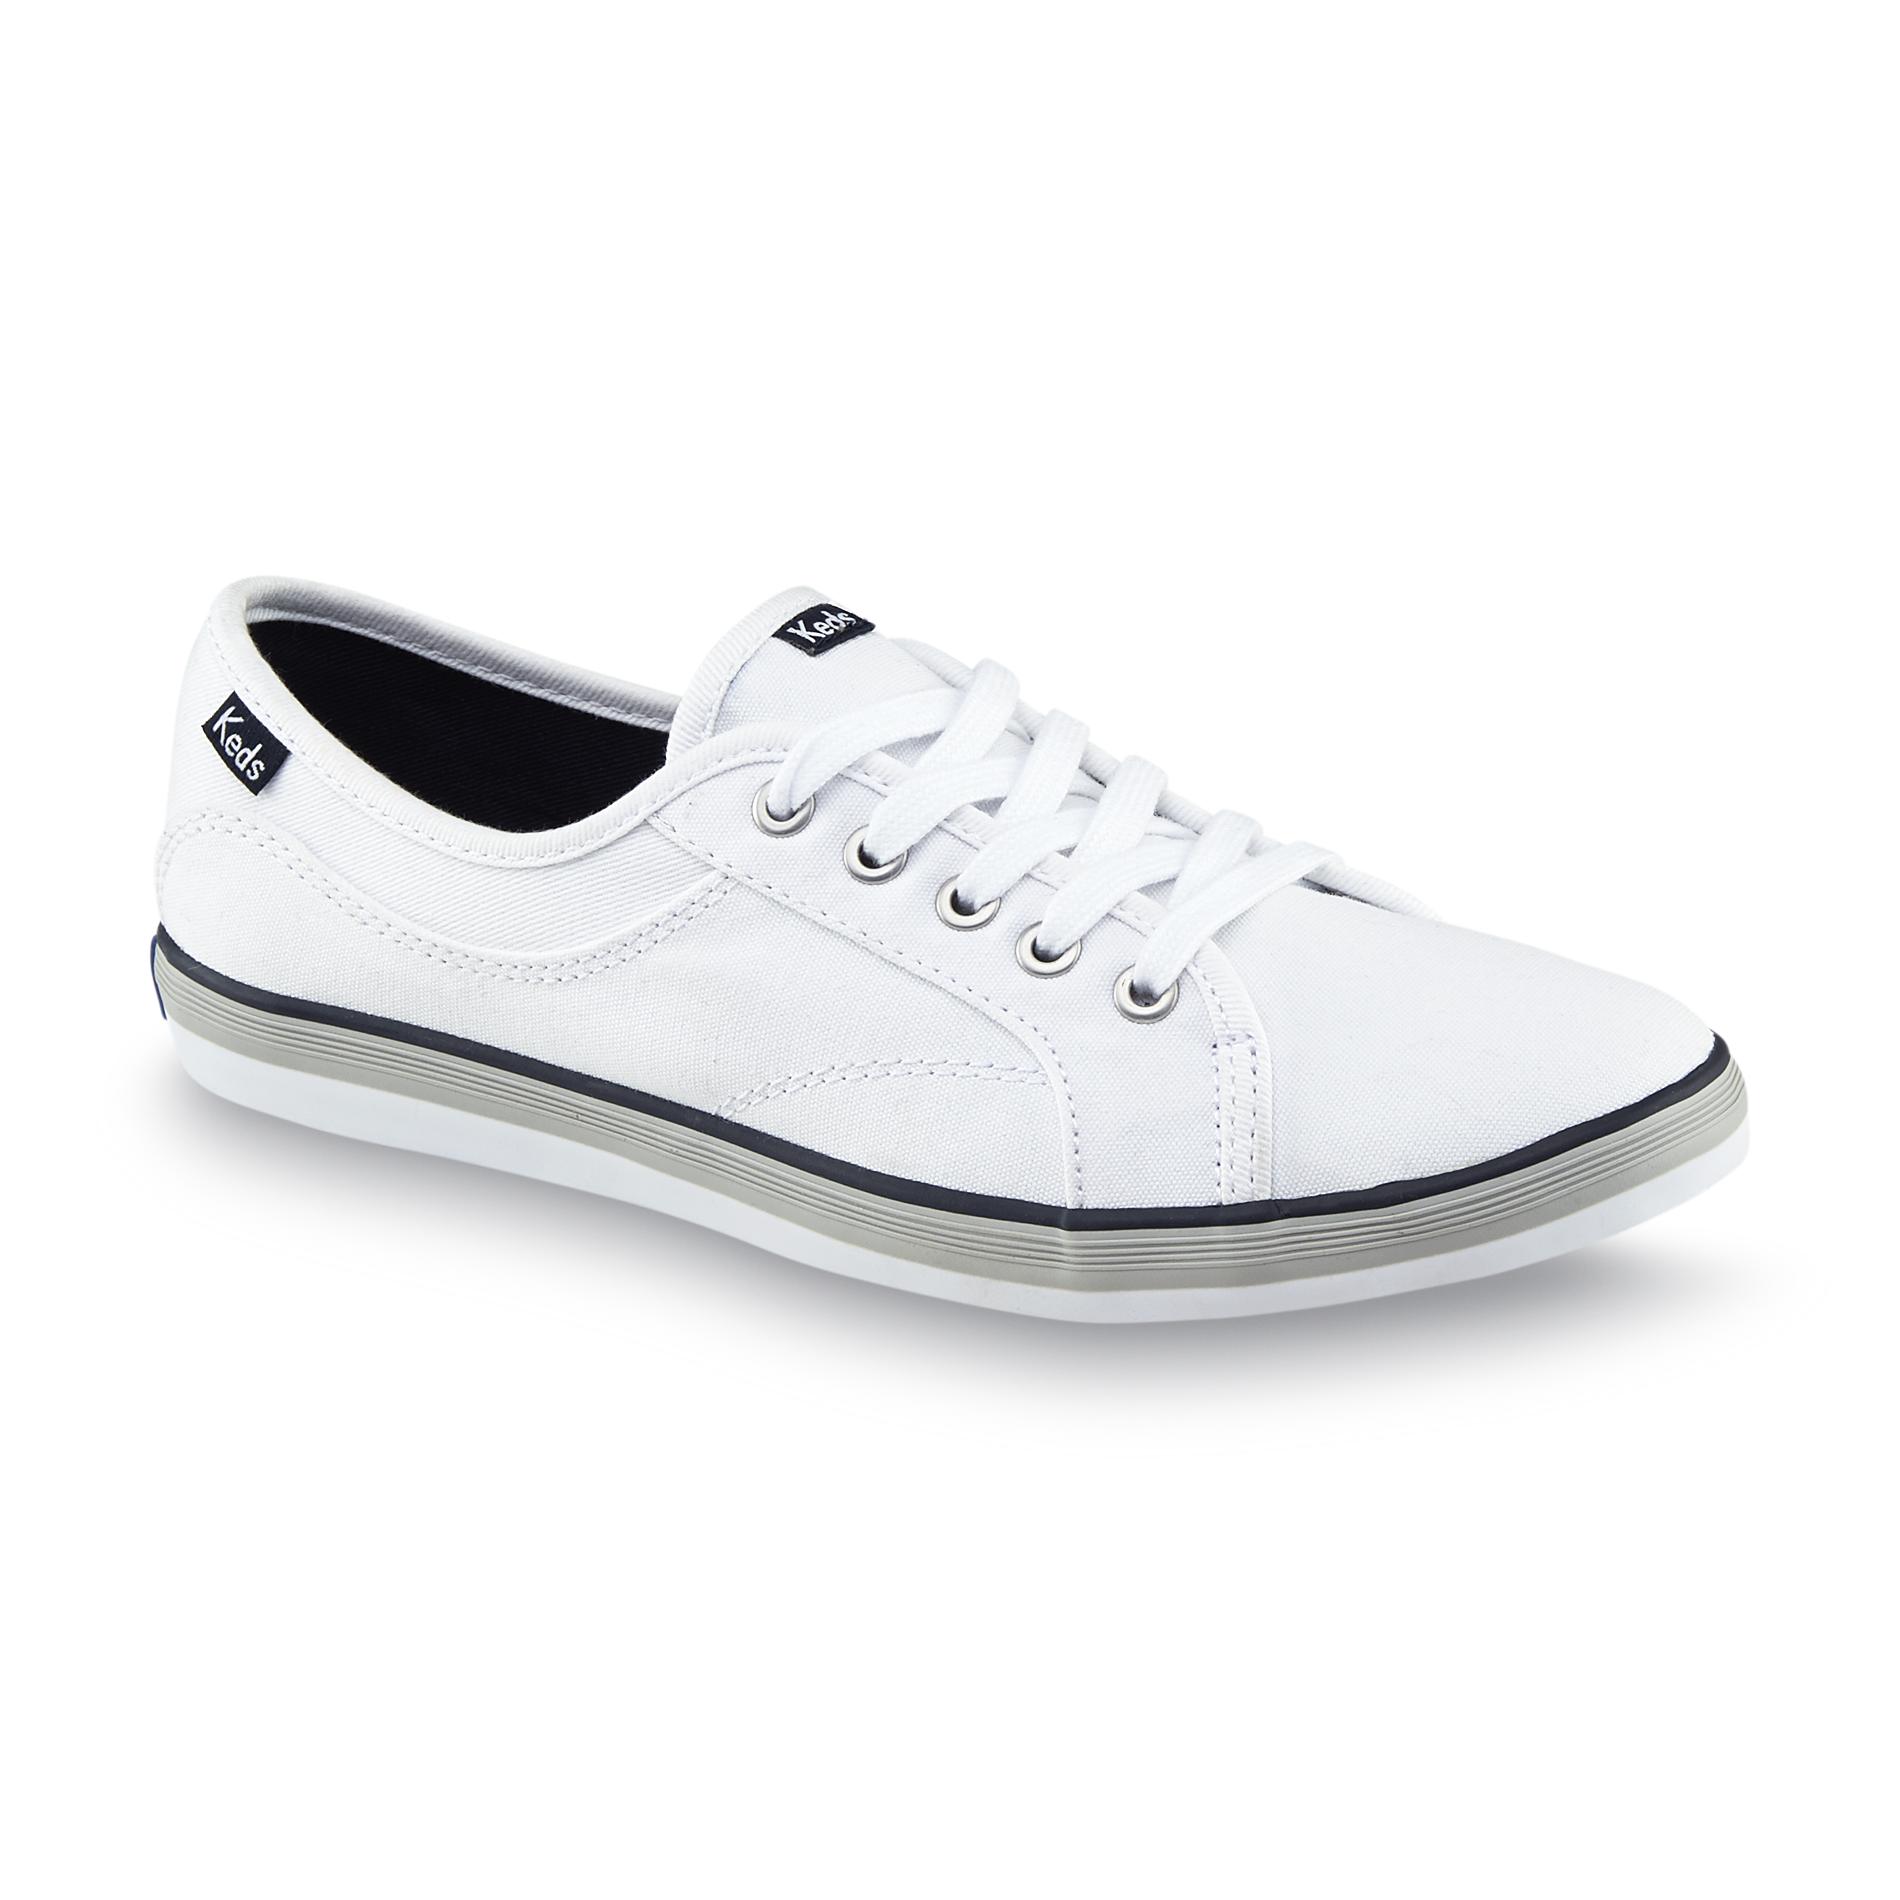 UPC 044208813673 product image for Keds Women's Coursa White Athletic Shoe - STRIDE RITE CORP./KEDS DIVISION | upcitemdb.com